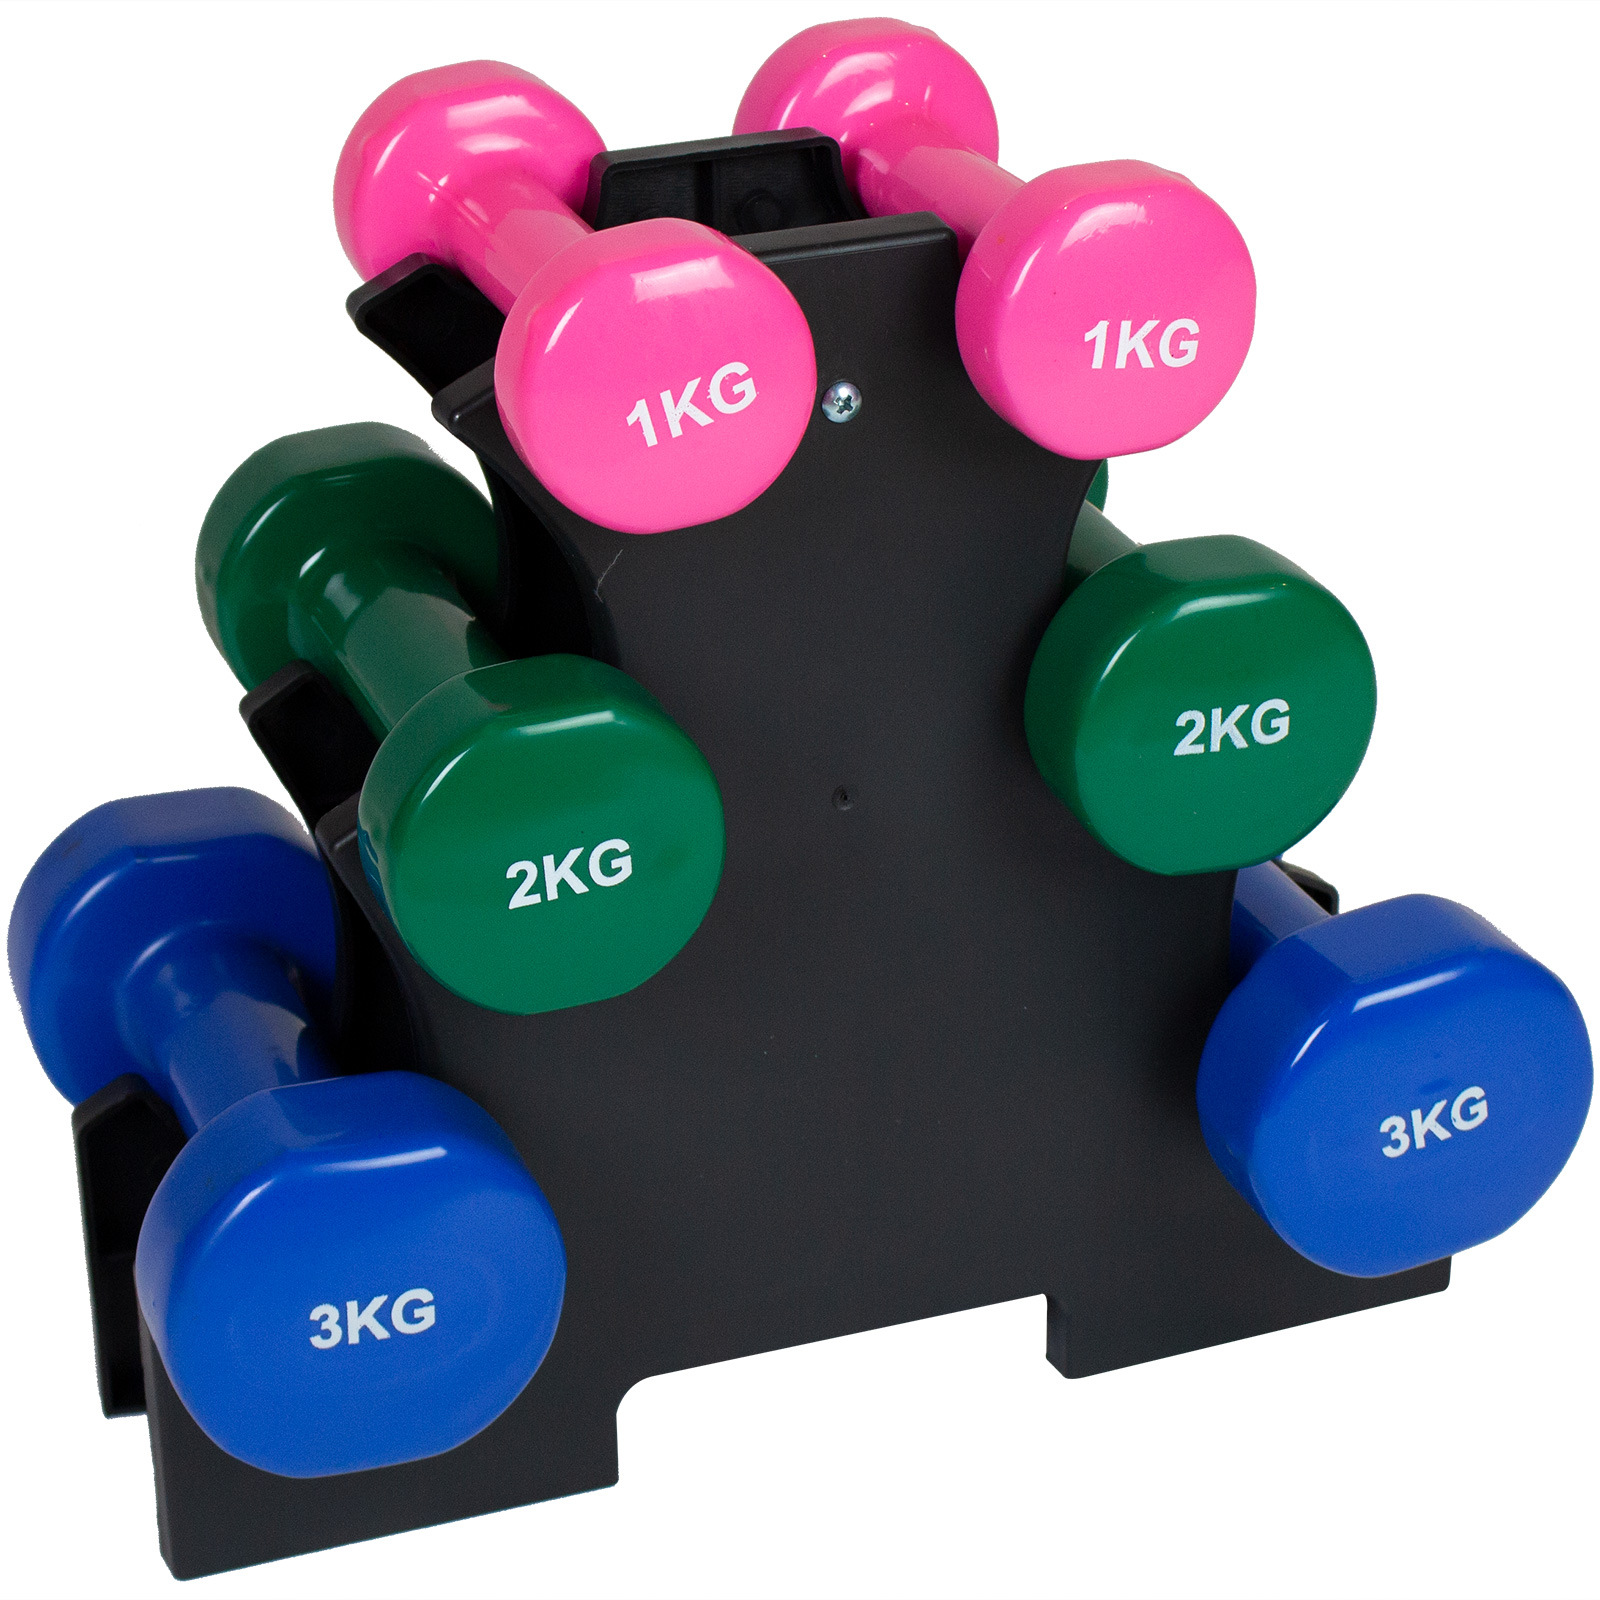 Glossy Dip Plastic Dumbbell Set Colorful Lady Fitness Home Solid Iron Small Dumbbell Strength Training Equipment - Paidu Group